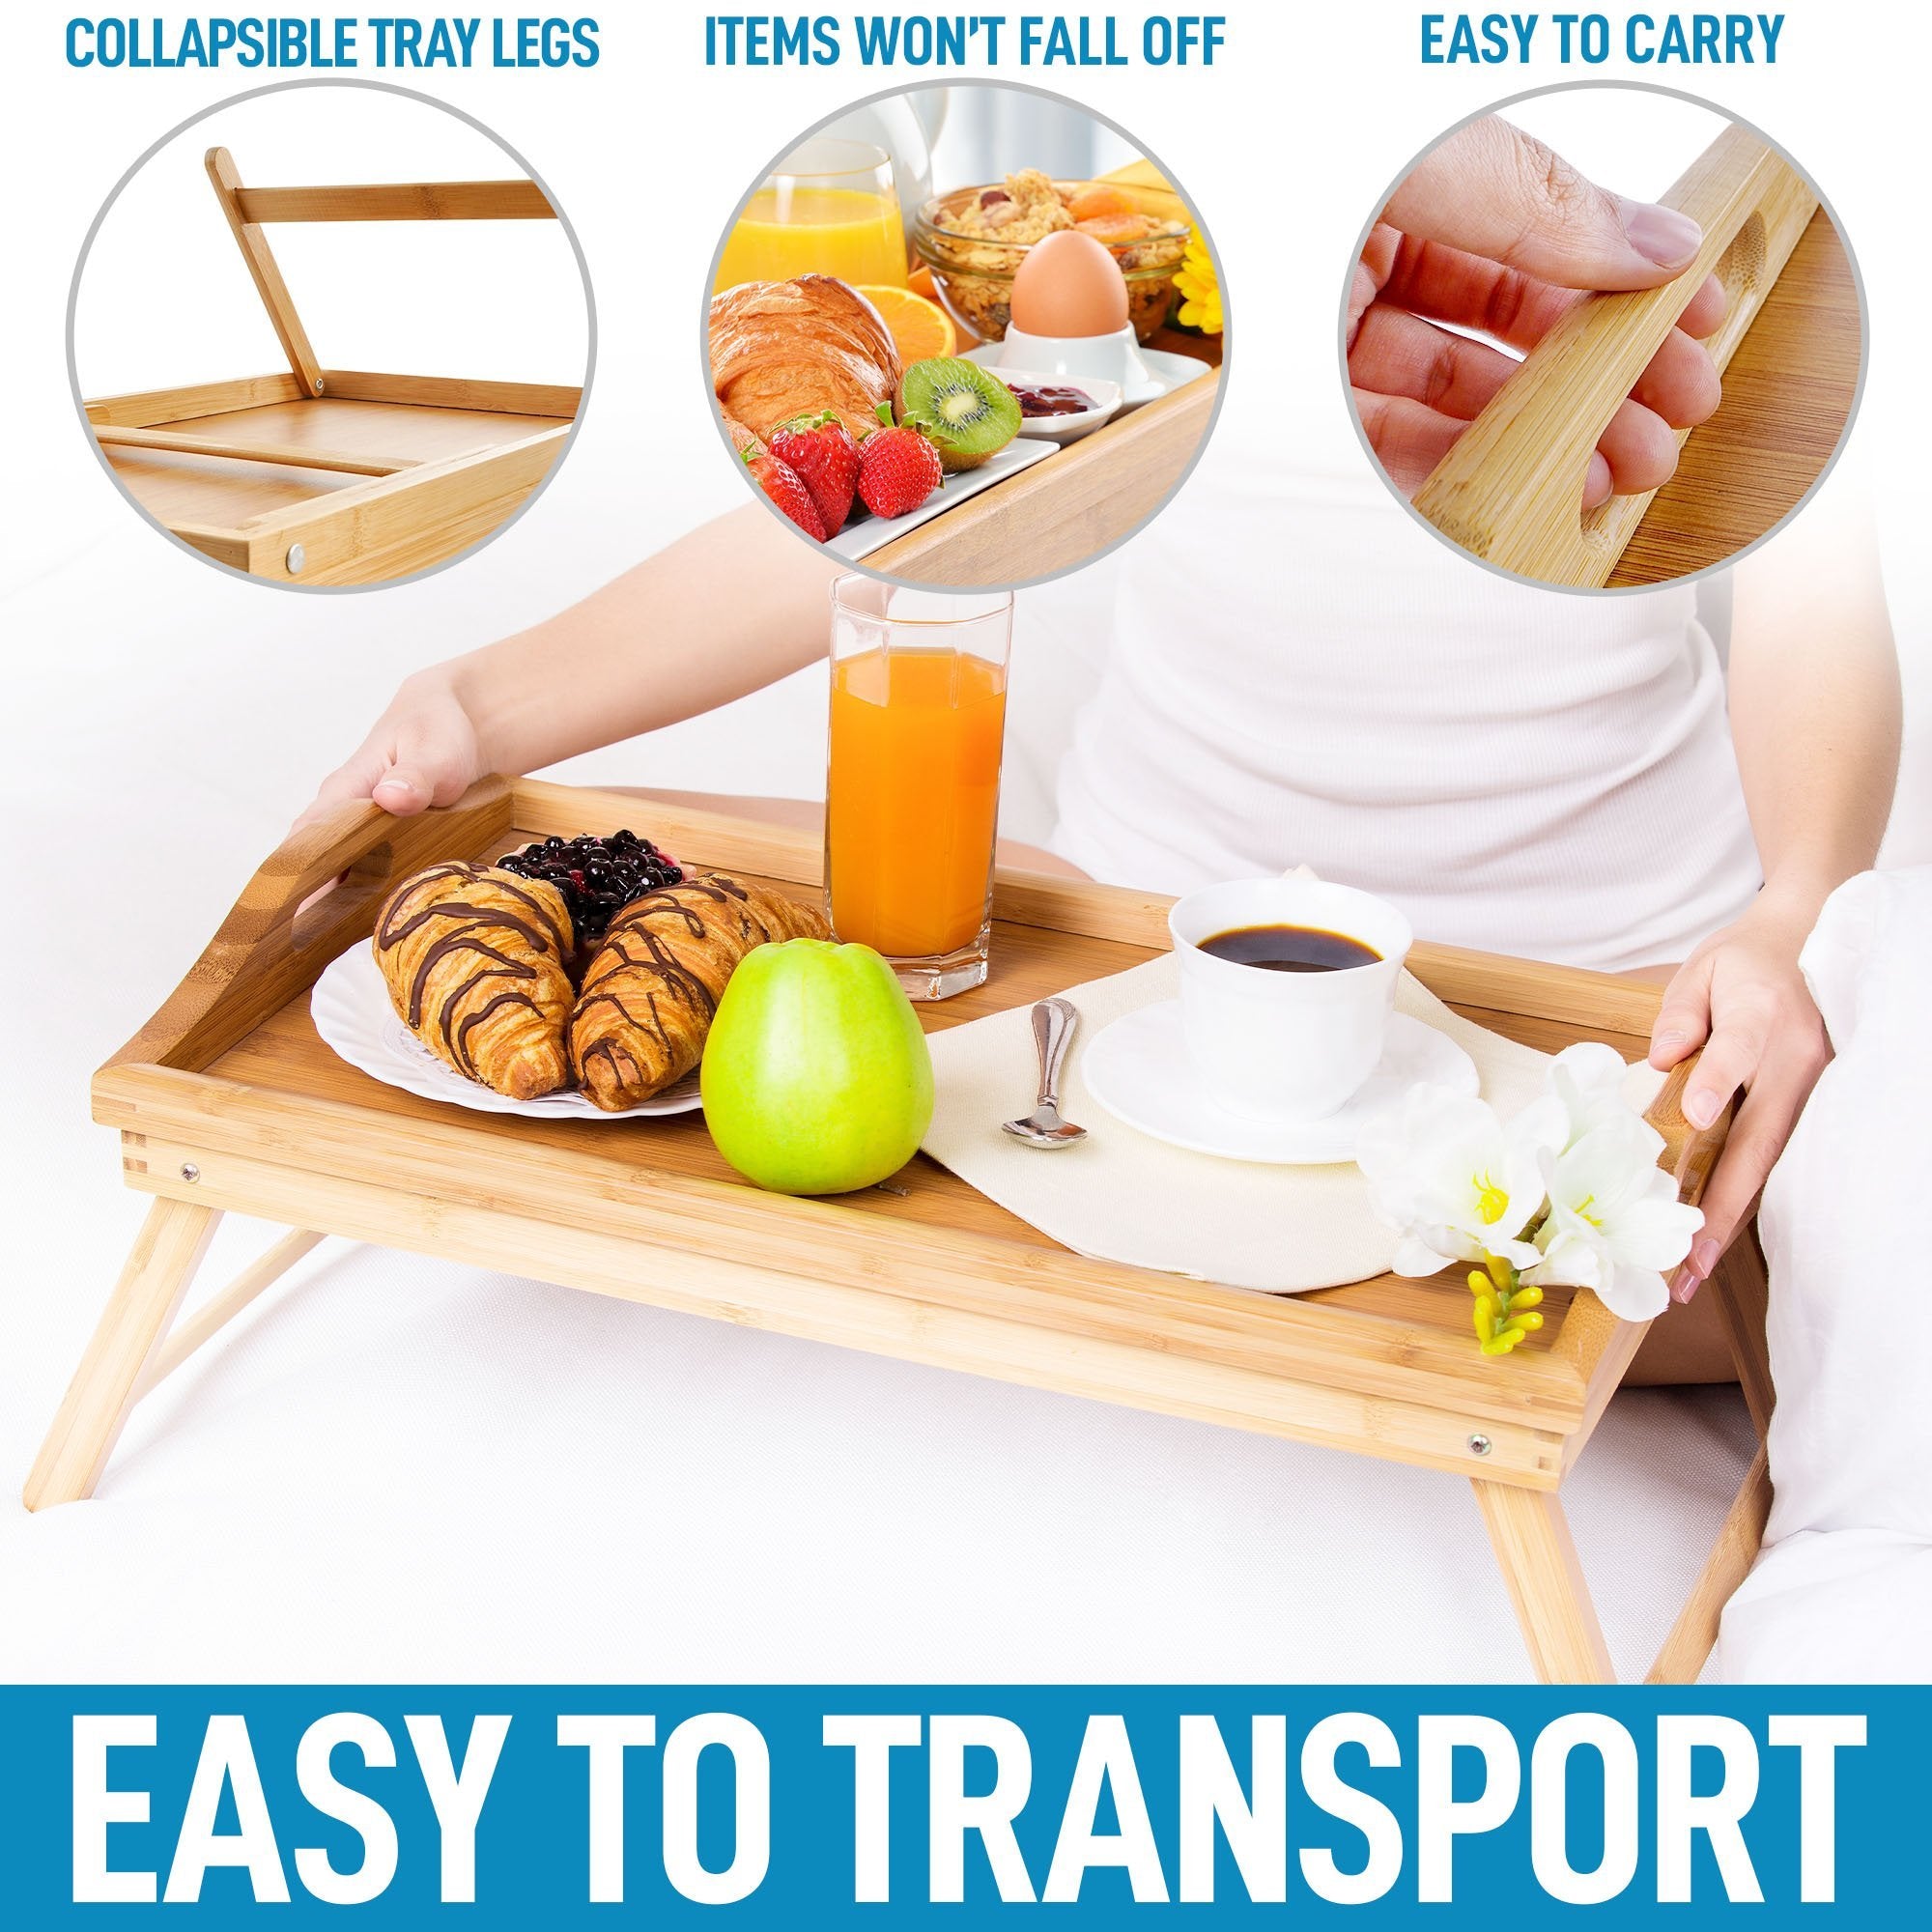 Bamboo Breakfast in Bed Tray Table - Zulay KitchenZulay Kitchen